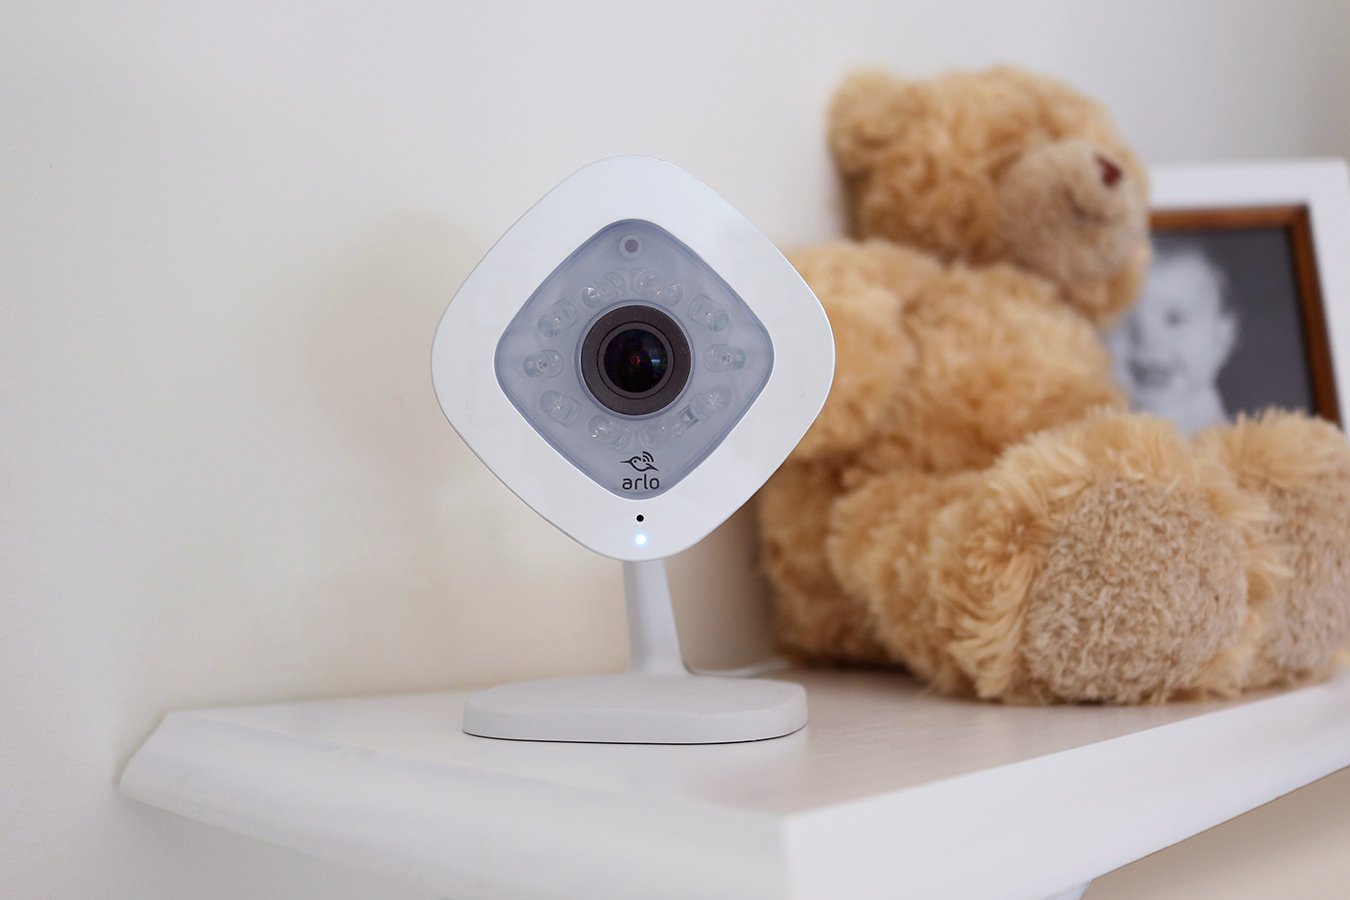 amazon slashes up to 300 off arlo and cloud cam security cameras q 1080p hd camera 3